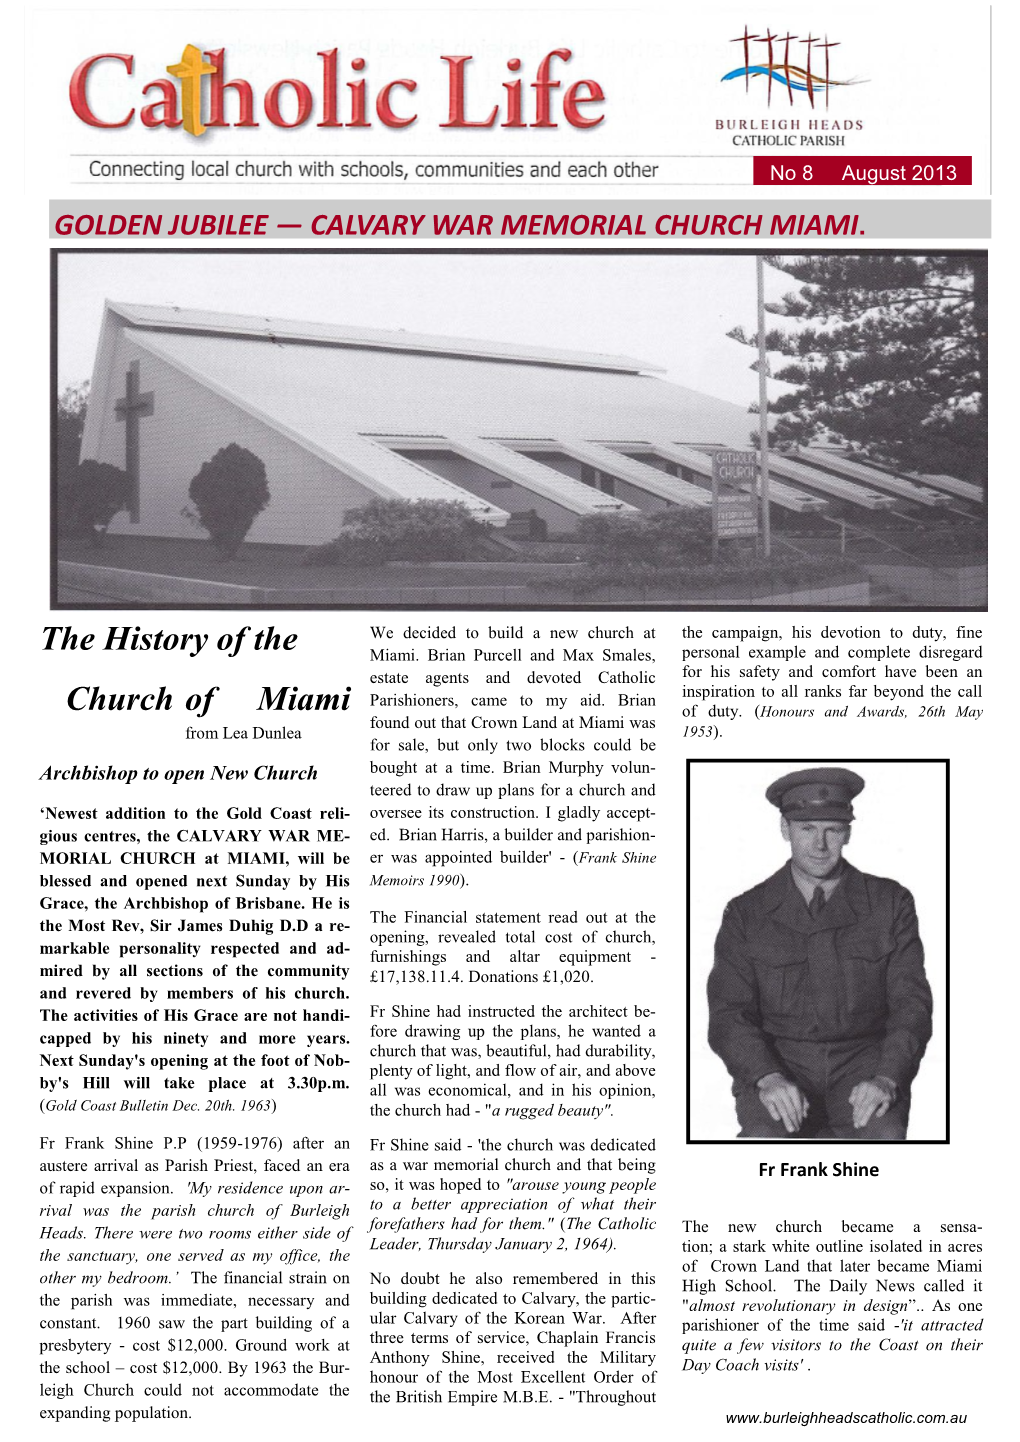 The History of the Church of Miami